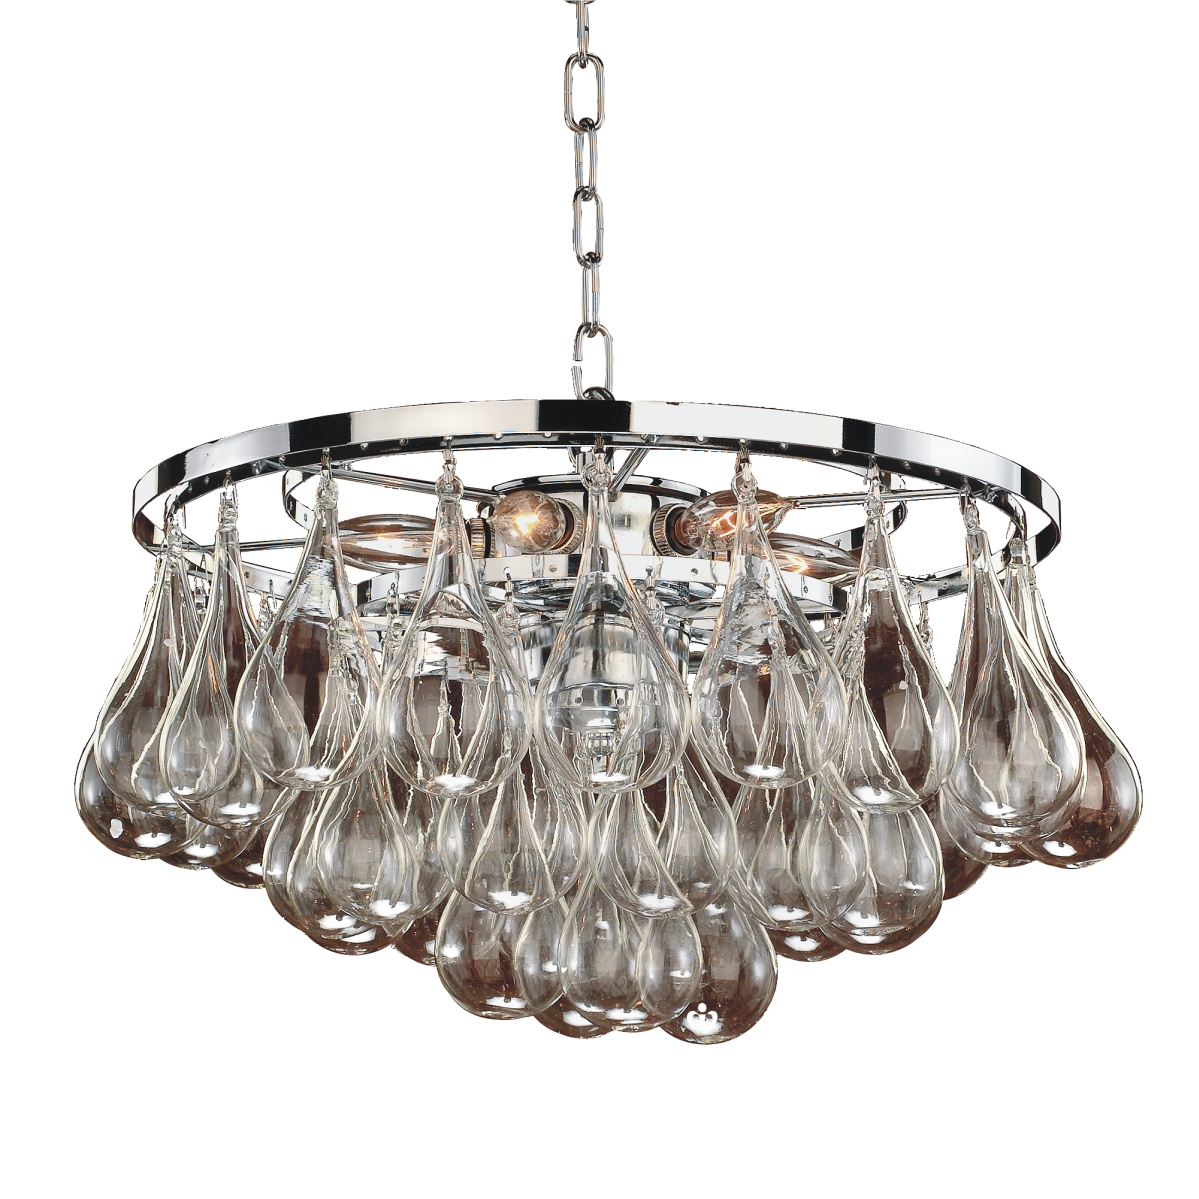 615gd15sp Concorde 615 16 In. Chrome & Glass Chandelier